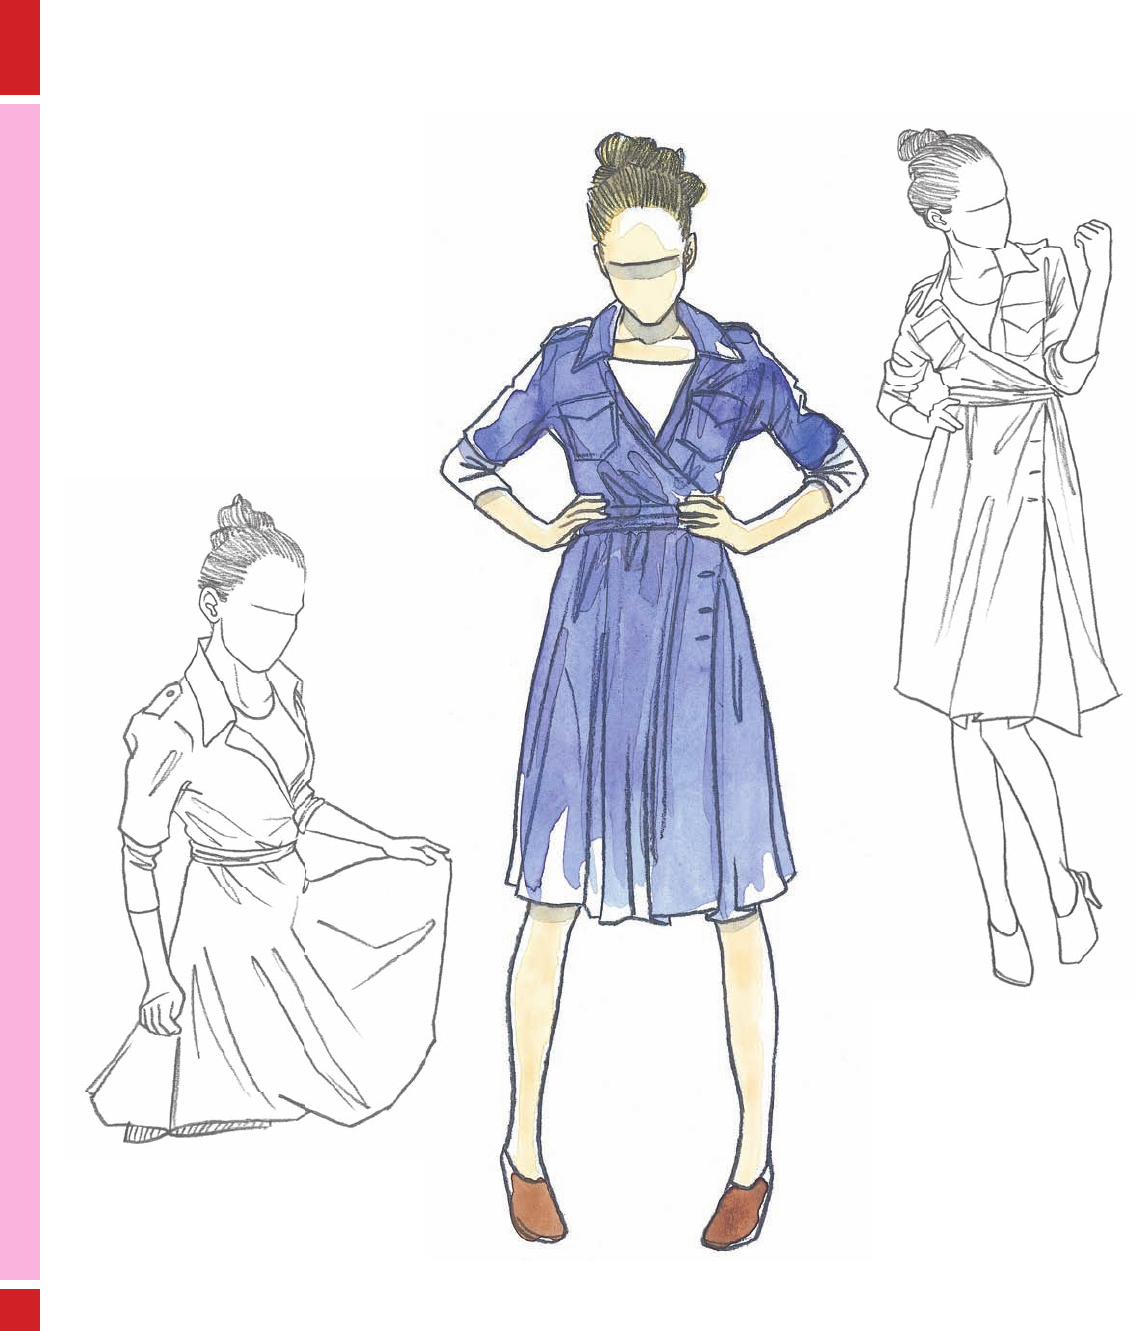 Poses for Fashion Illustration - Womens